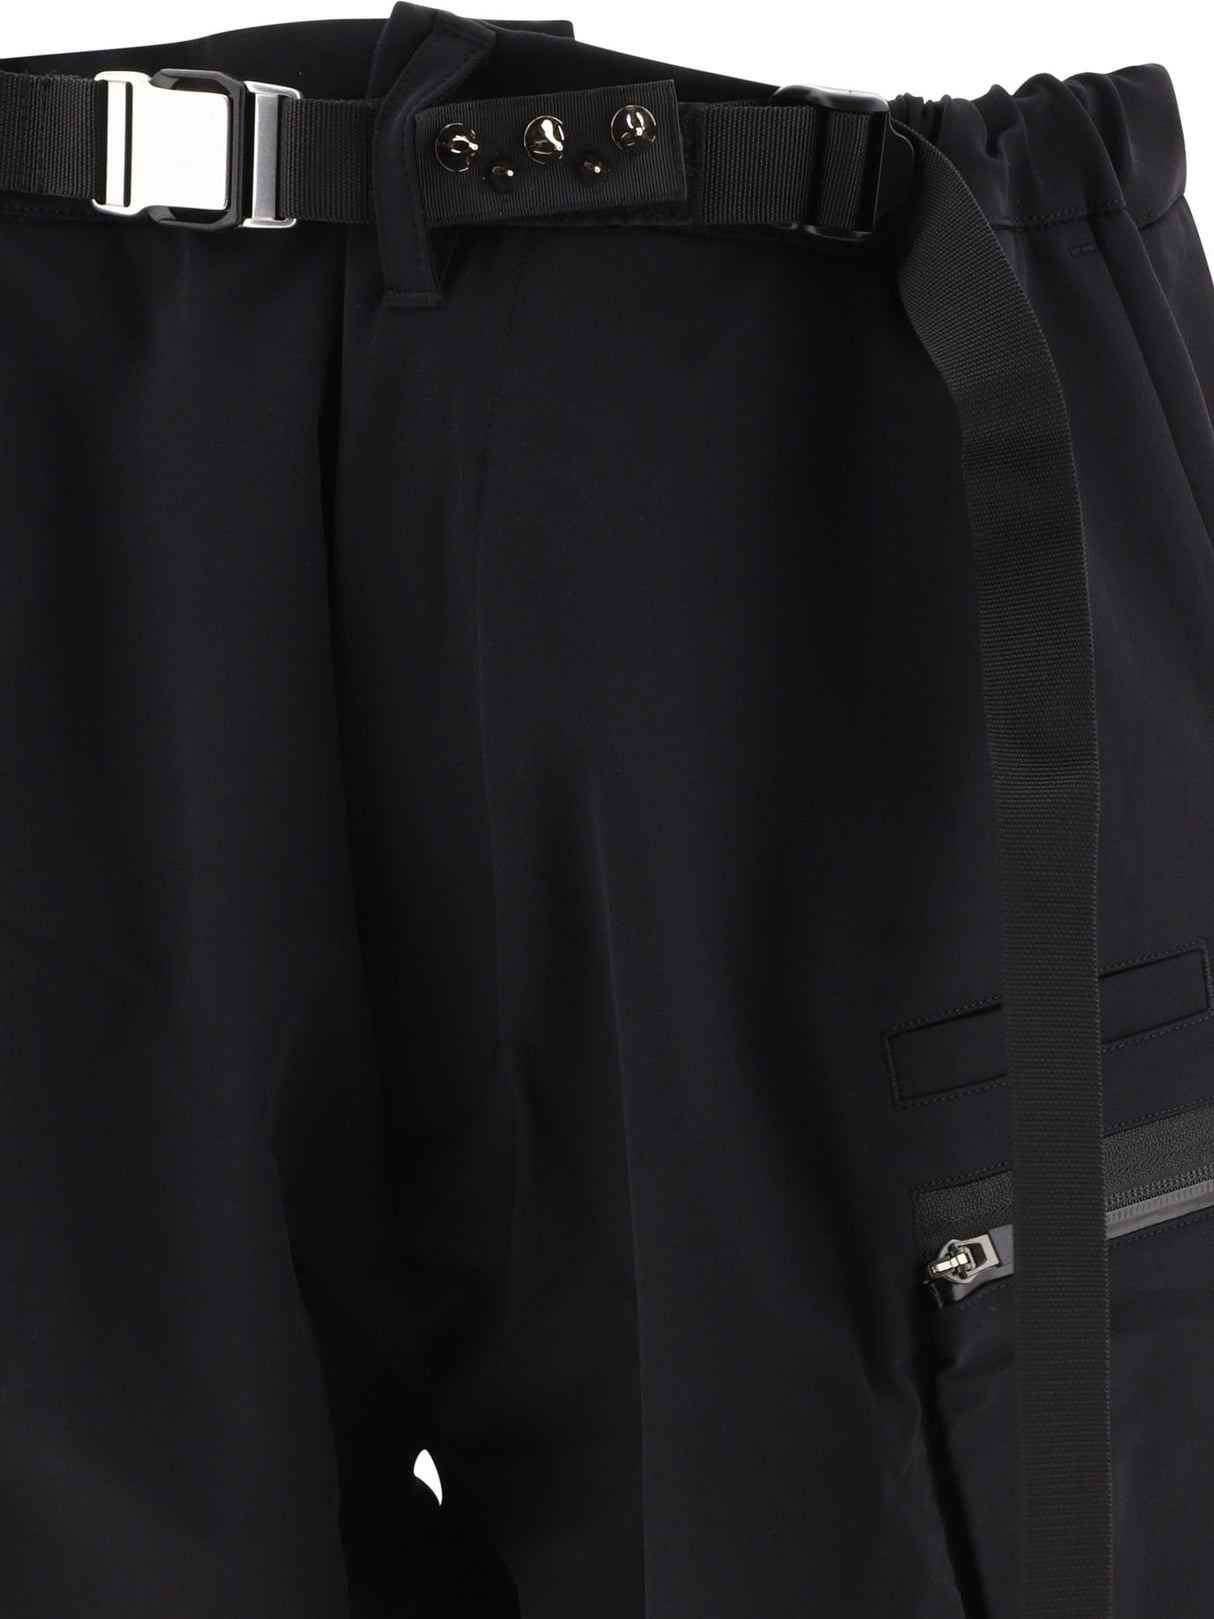 ACRONYM Black Utility Shorts for Men - SS24 Collection